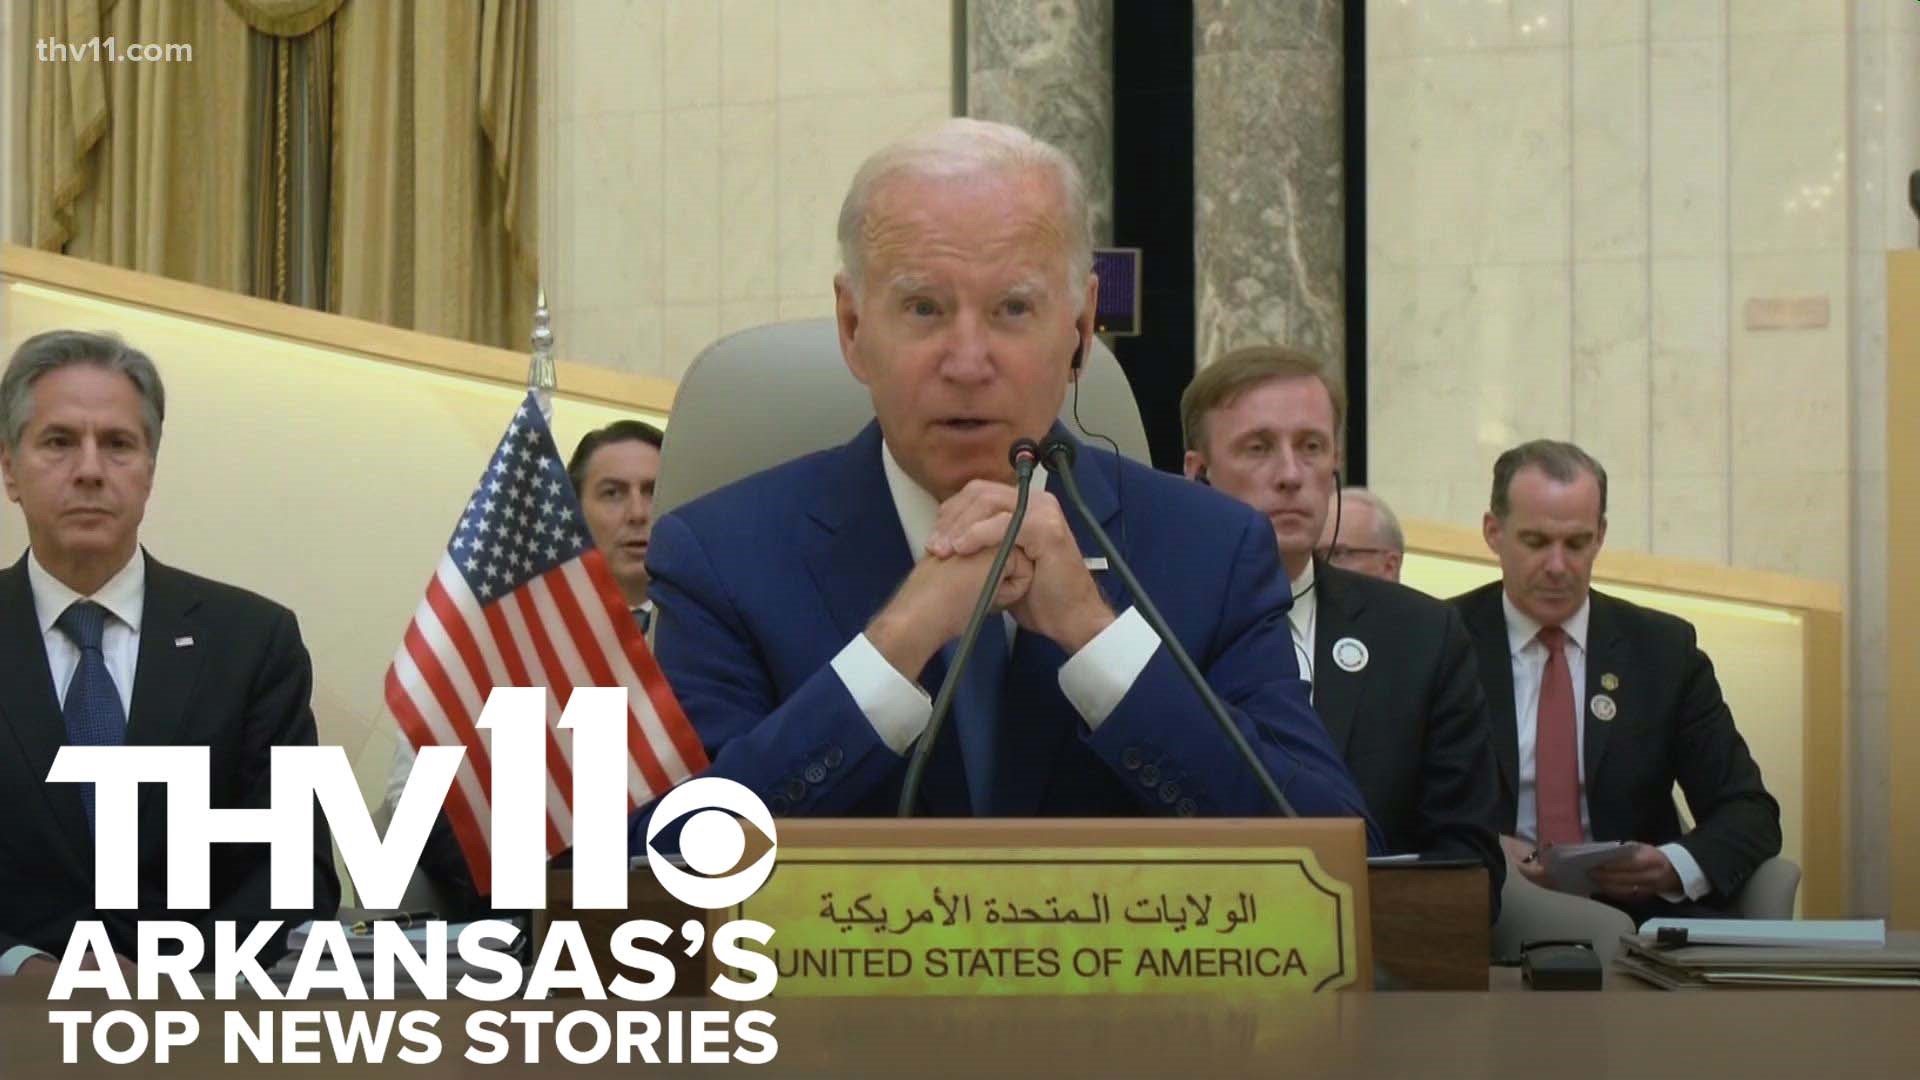 Your top news stories in Arkansas for July 16, 2022, including abortion rights and details from Biden's trip to the Middle East.